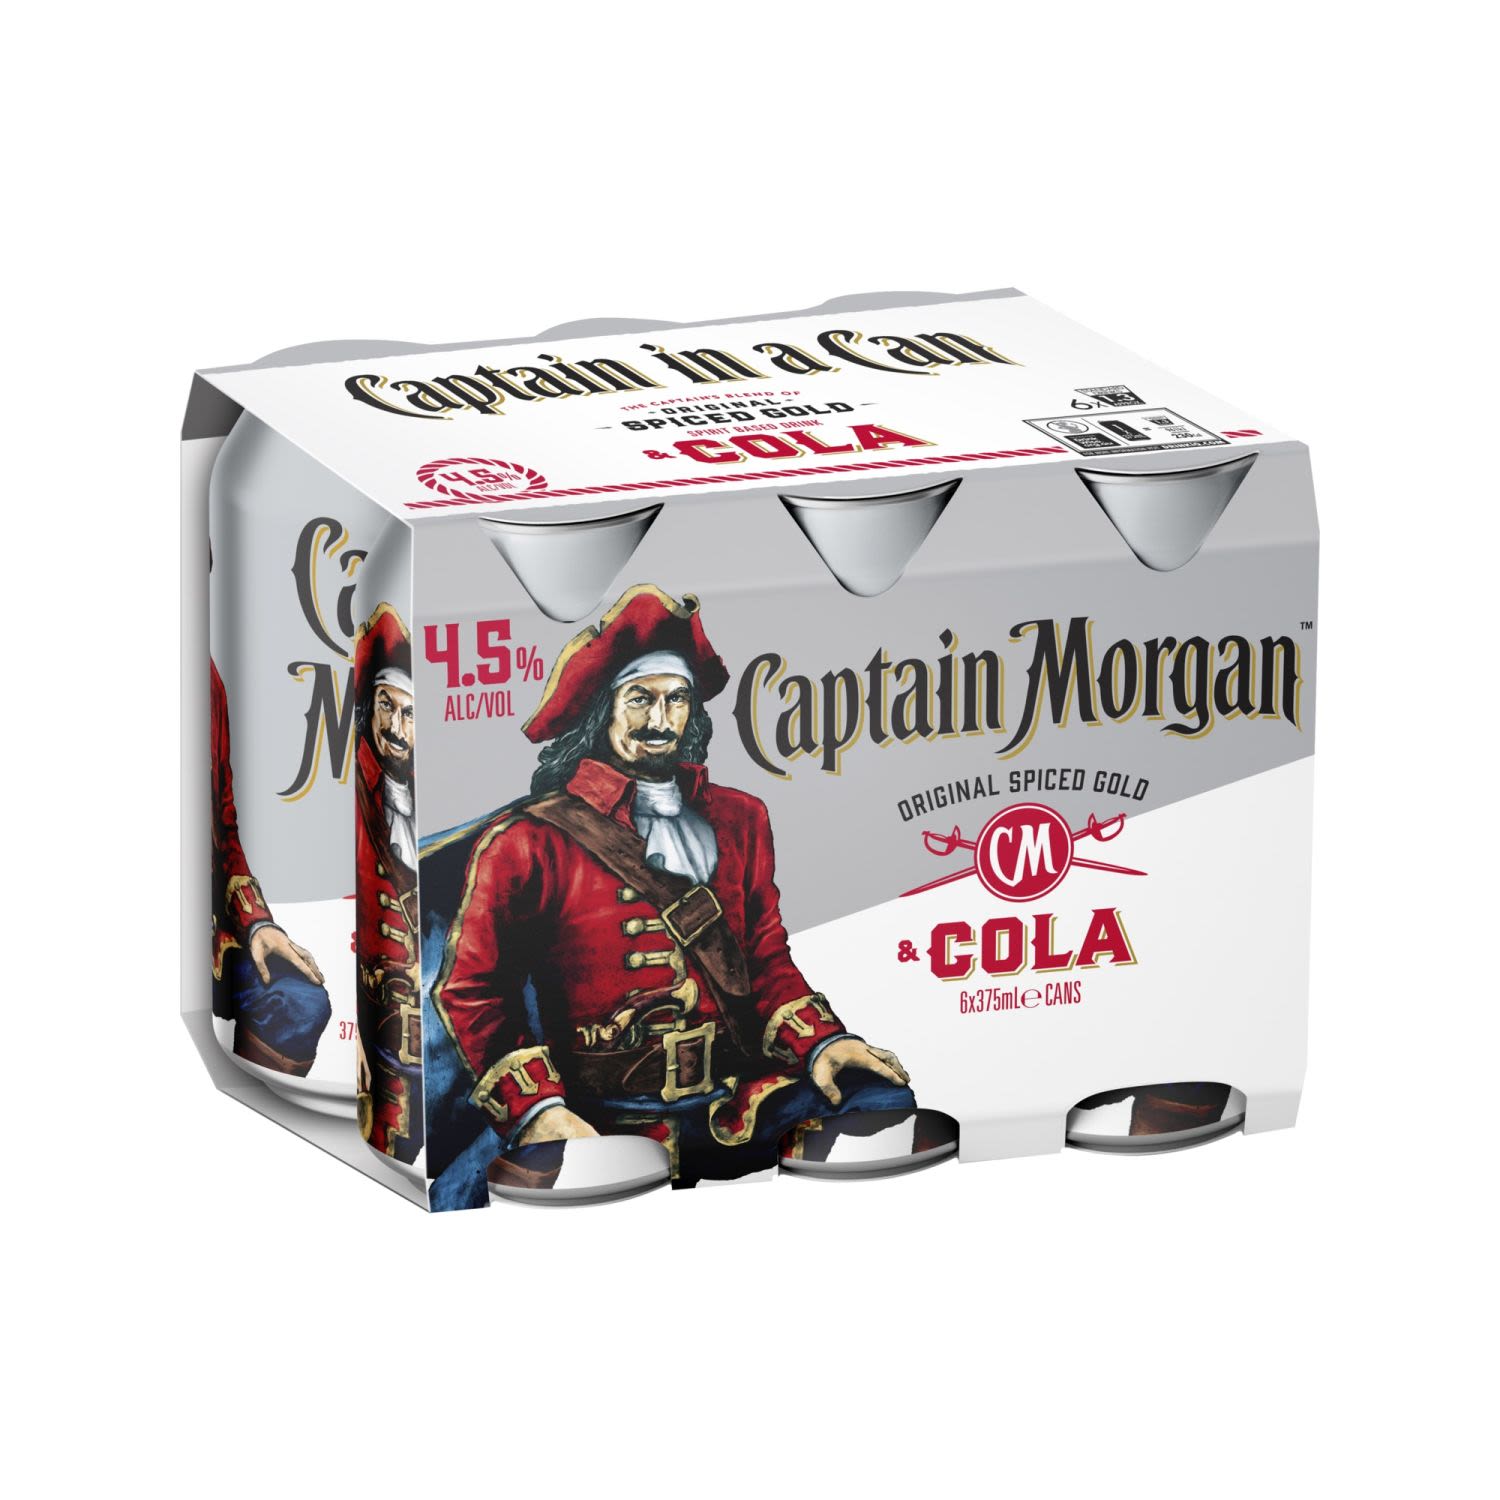 Captain Morgan Original Spiced Gold & Cola 4.5% Can 375mL 6 Pack